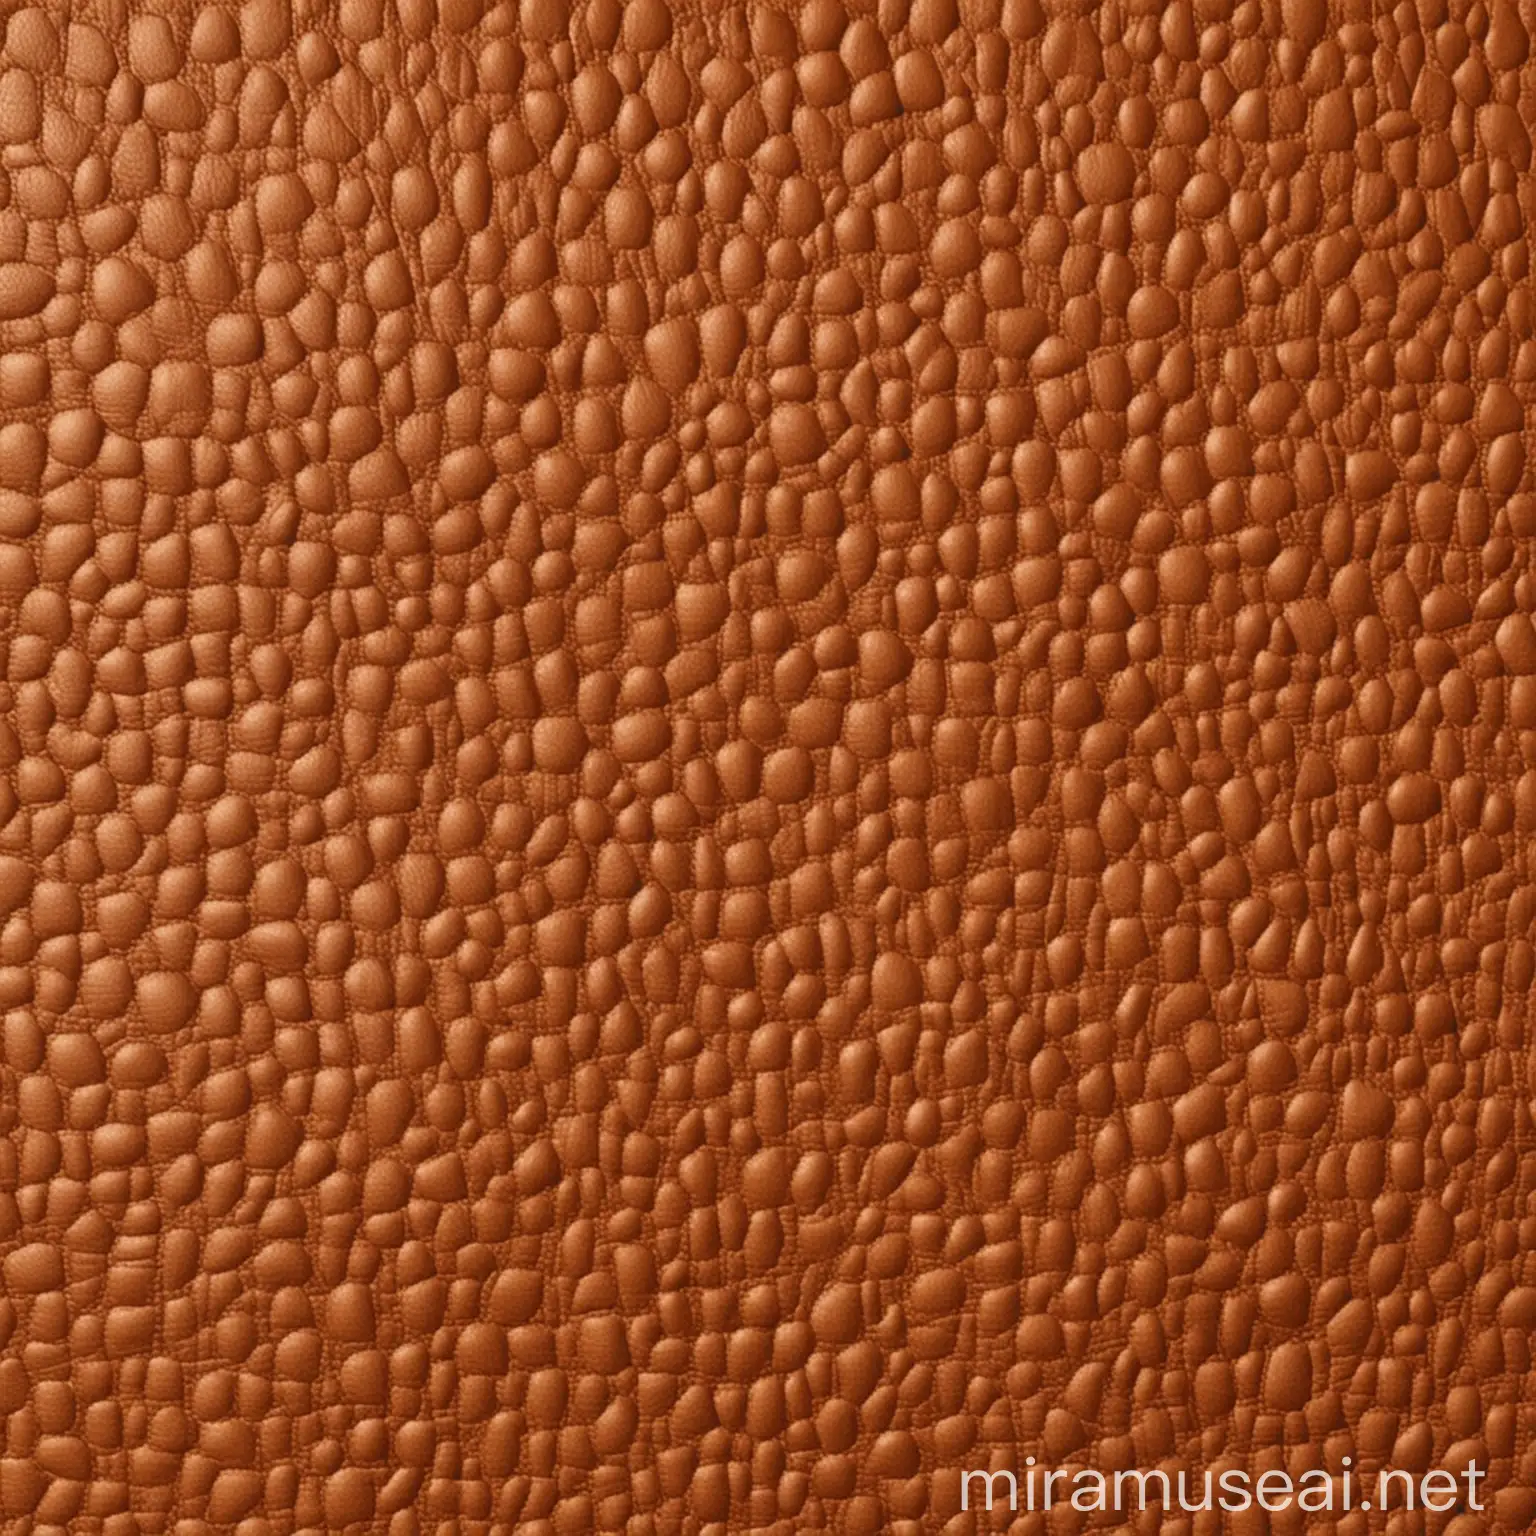 A high-definition photo of leather made from imitation pigskin，disney pixar style